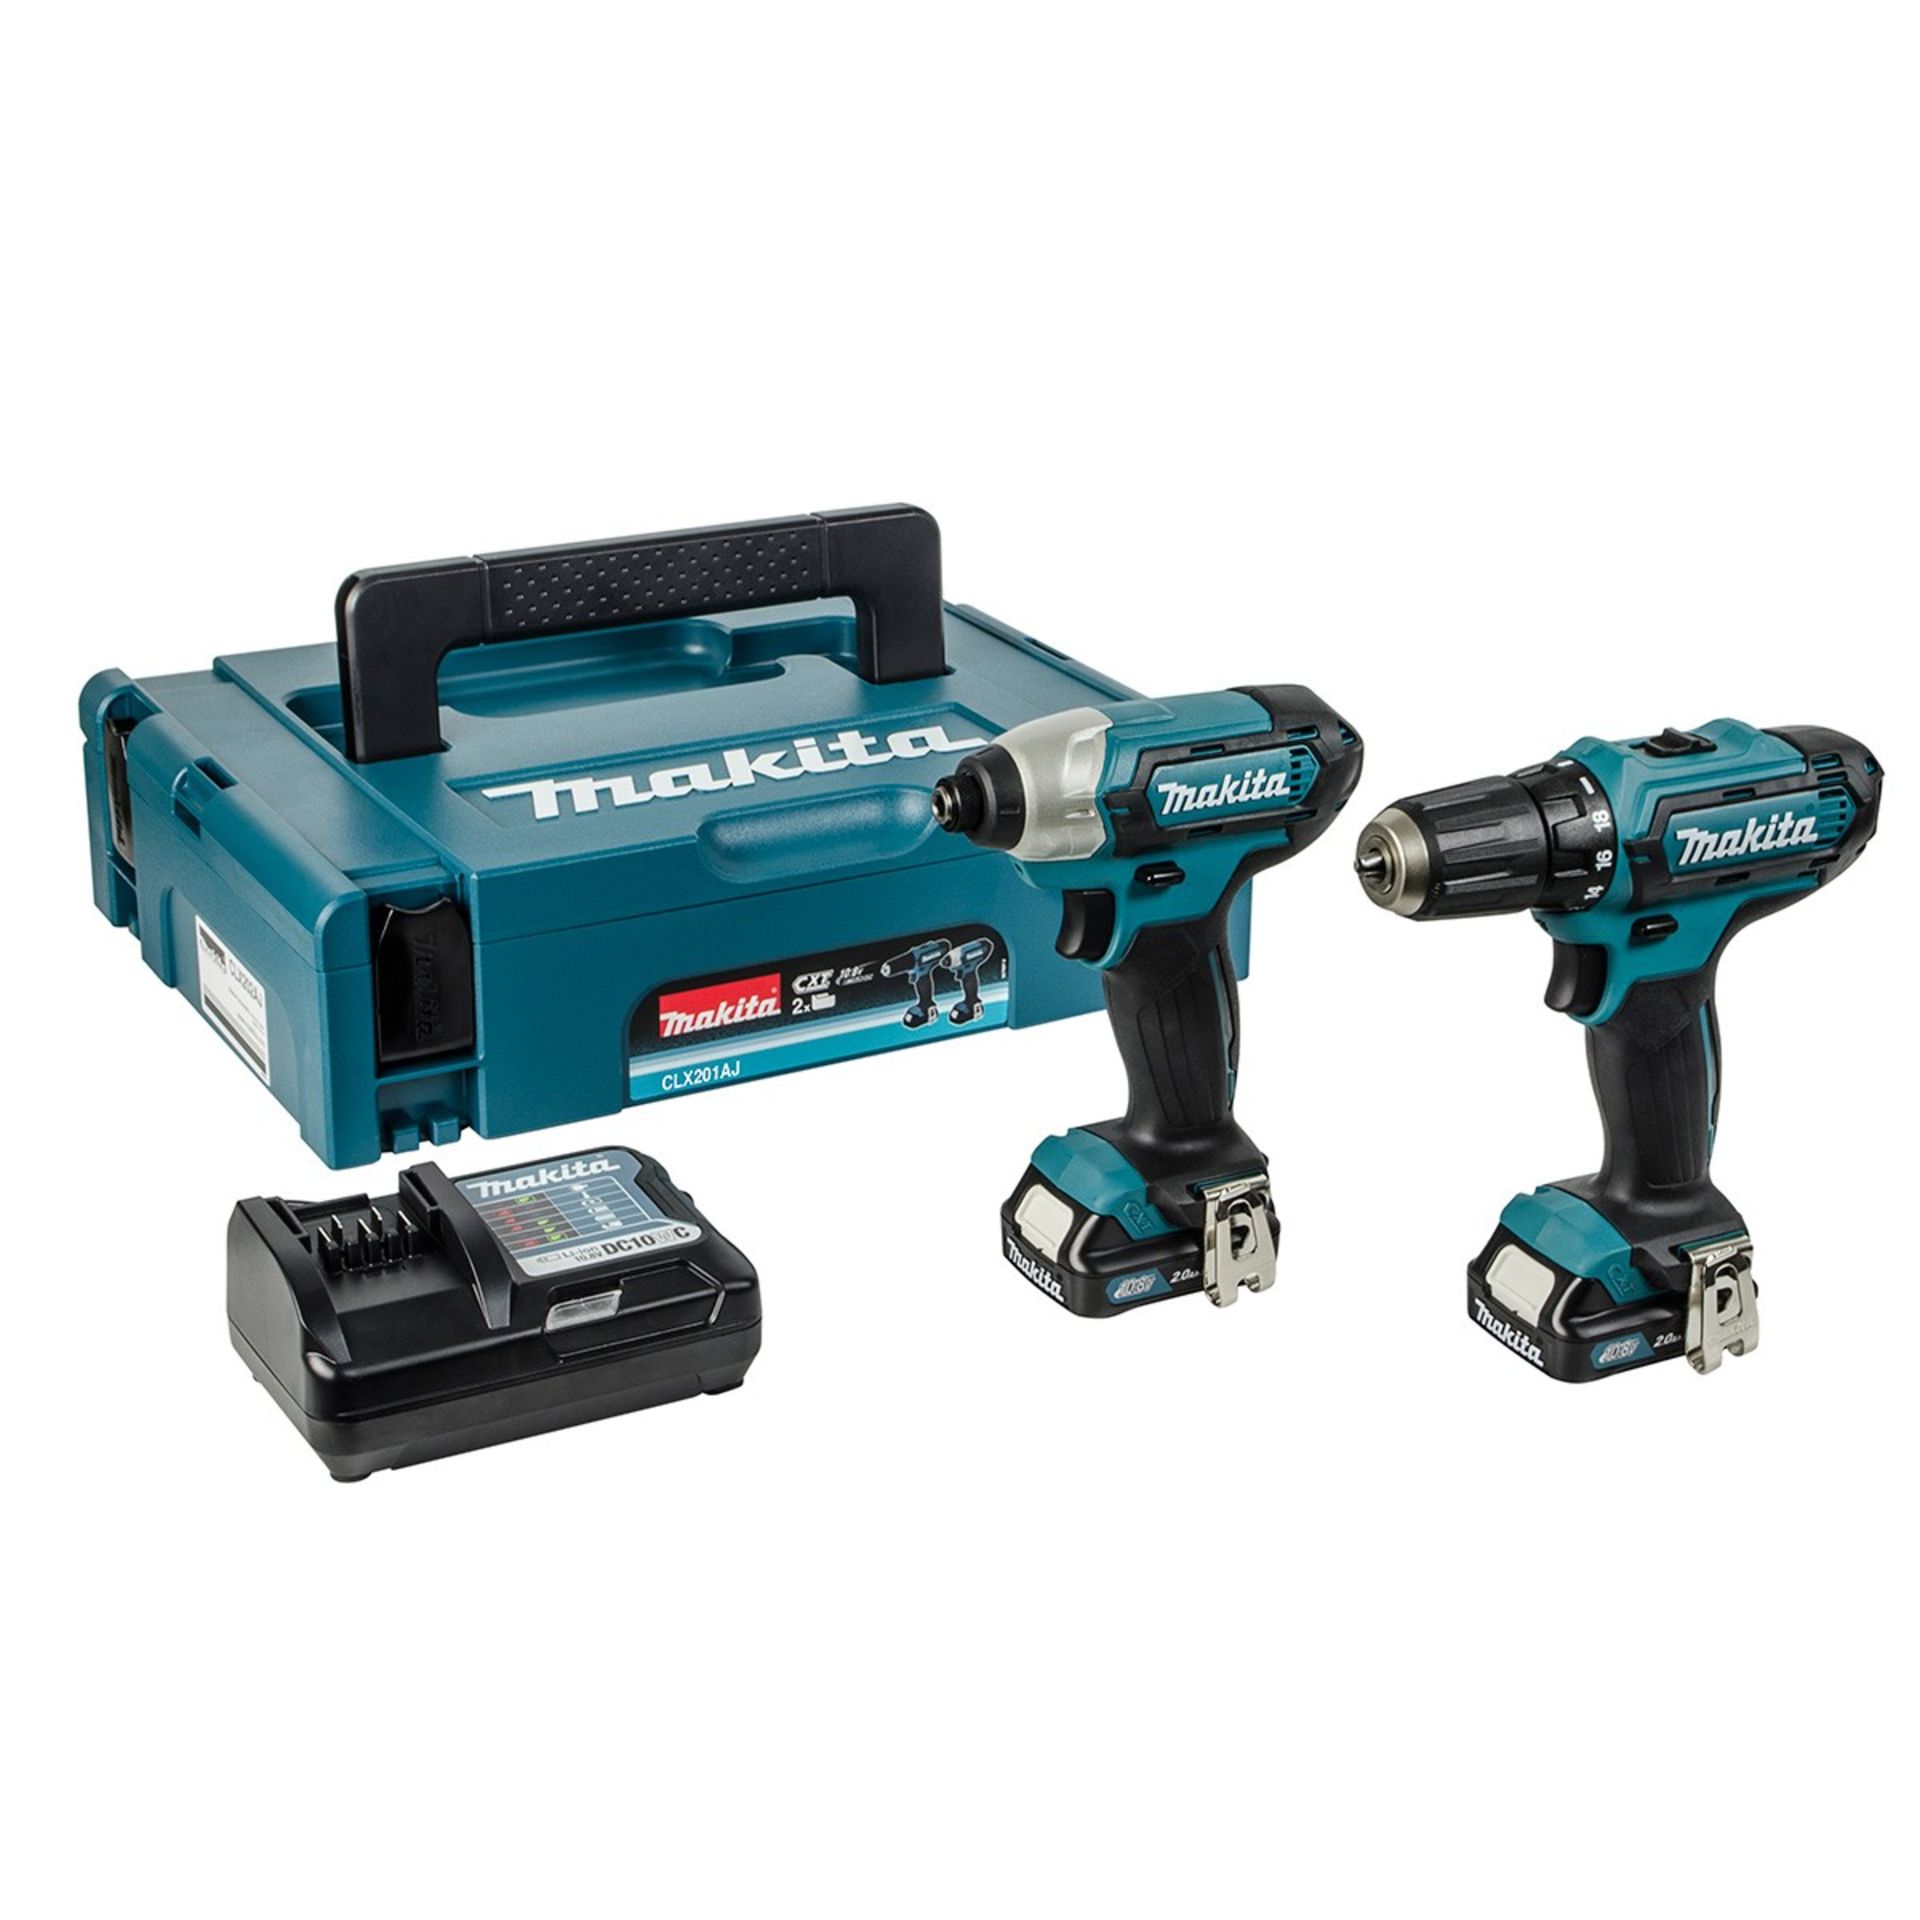 V Brand New Makita Twin Drill And Driver Set - Includes 2 Batteries And Charger/Case Etc - 10.8V (